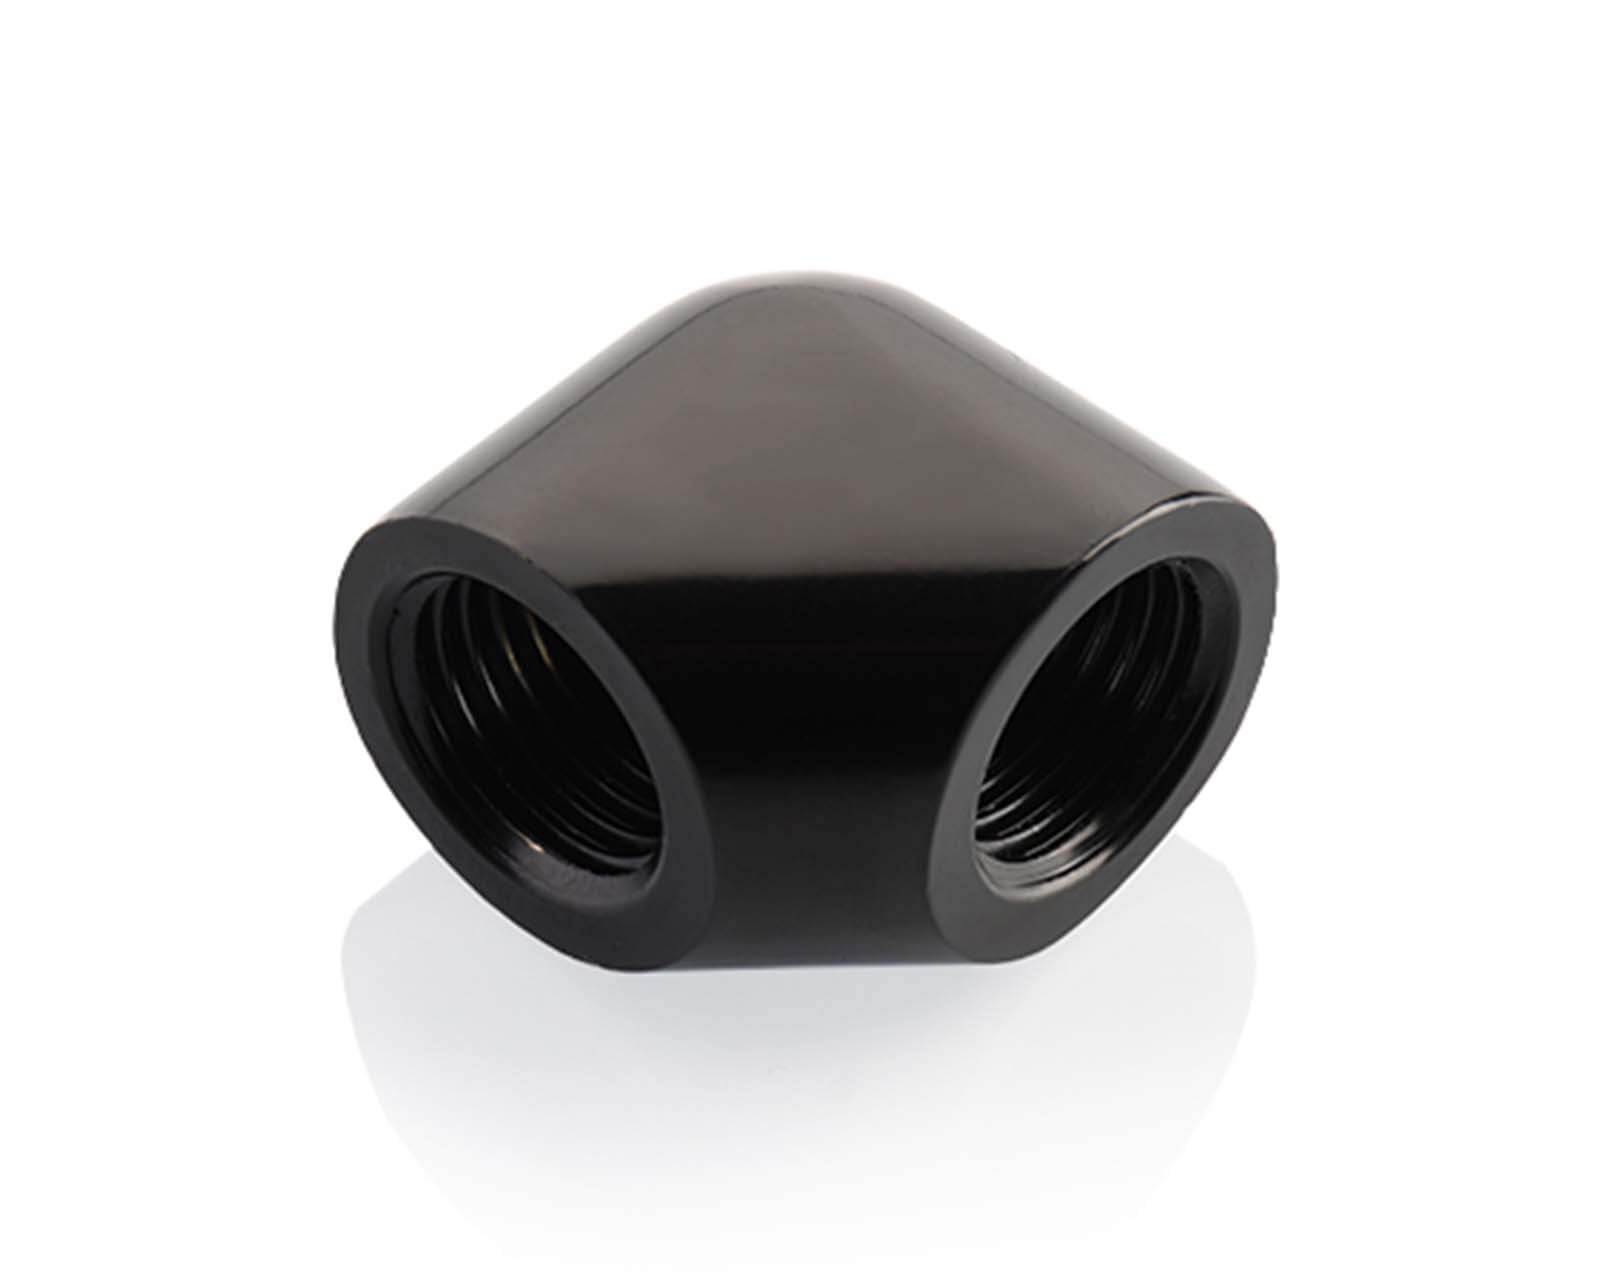 Bykski Female to Female G 1/4in. 90 Degree Extended Elbow Fitting (CC-EW90-V2) - PrimoChill - KEEPING IT COOL Black